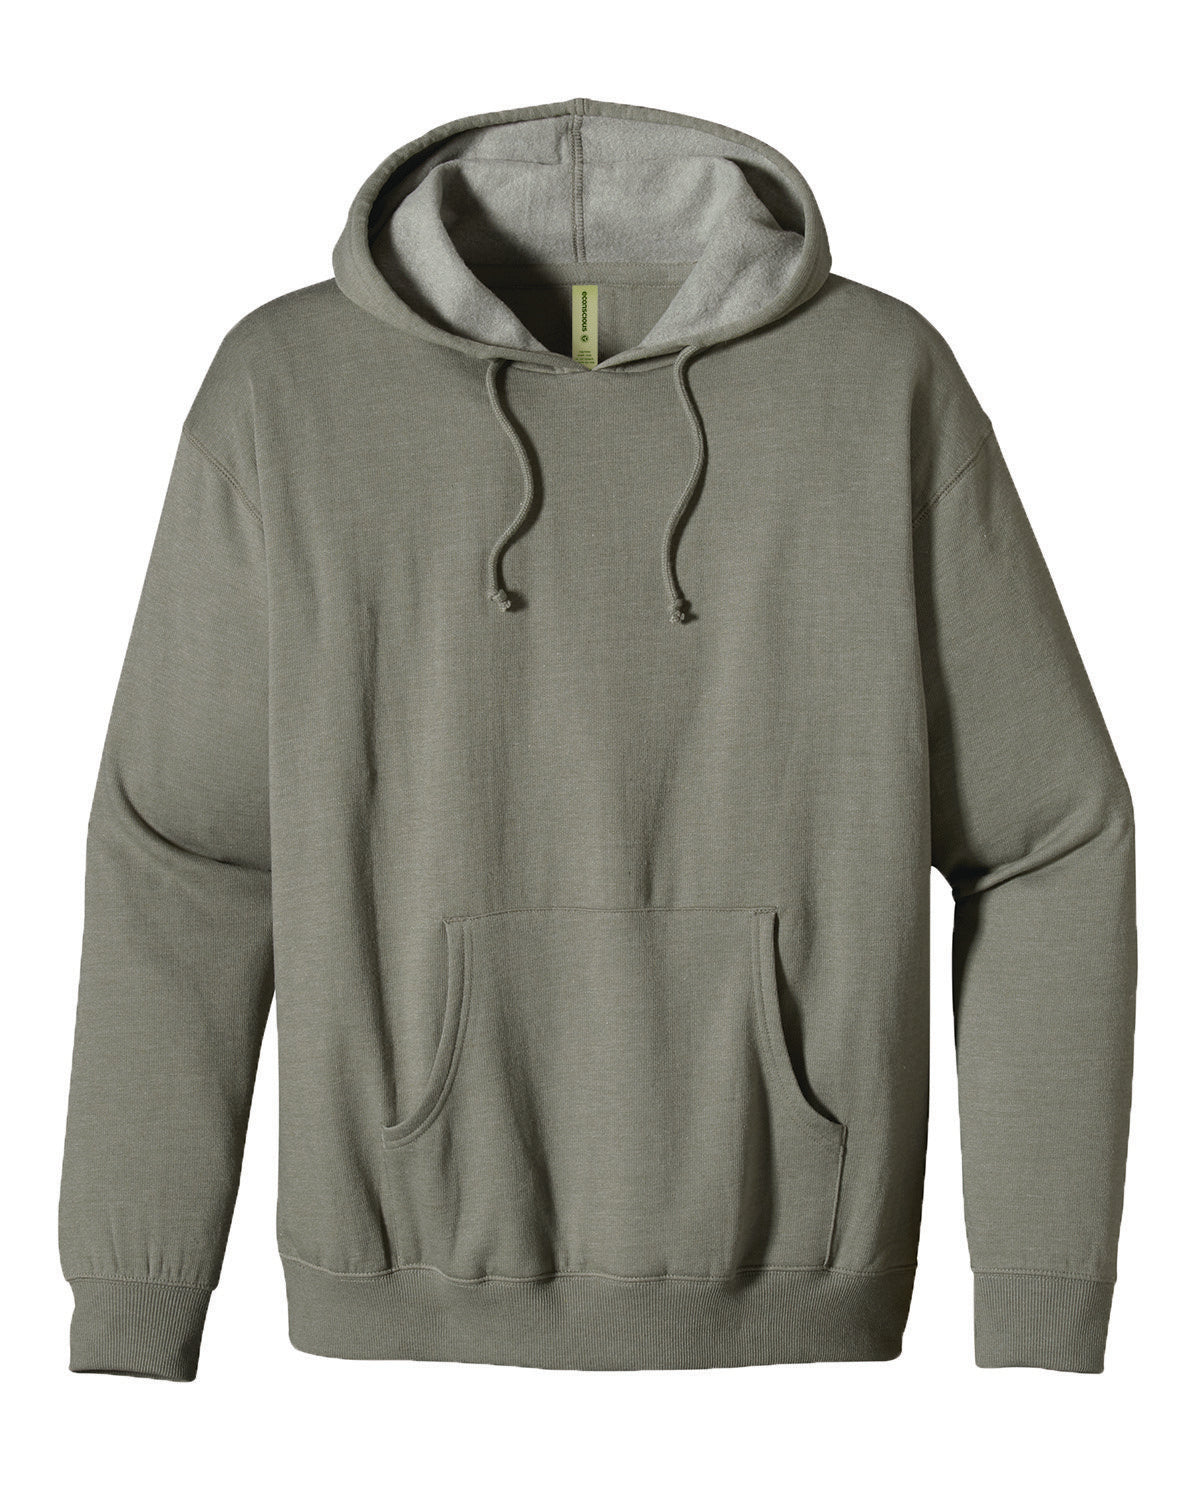 Sustainable Comfort and Style: Adult Organic/Recycled Heathered Fleece Pullover Hooded Sweatshirt by econscious